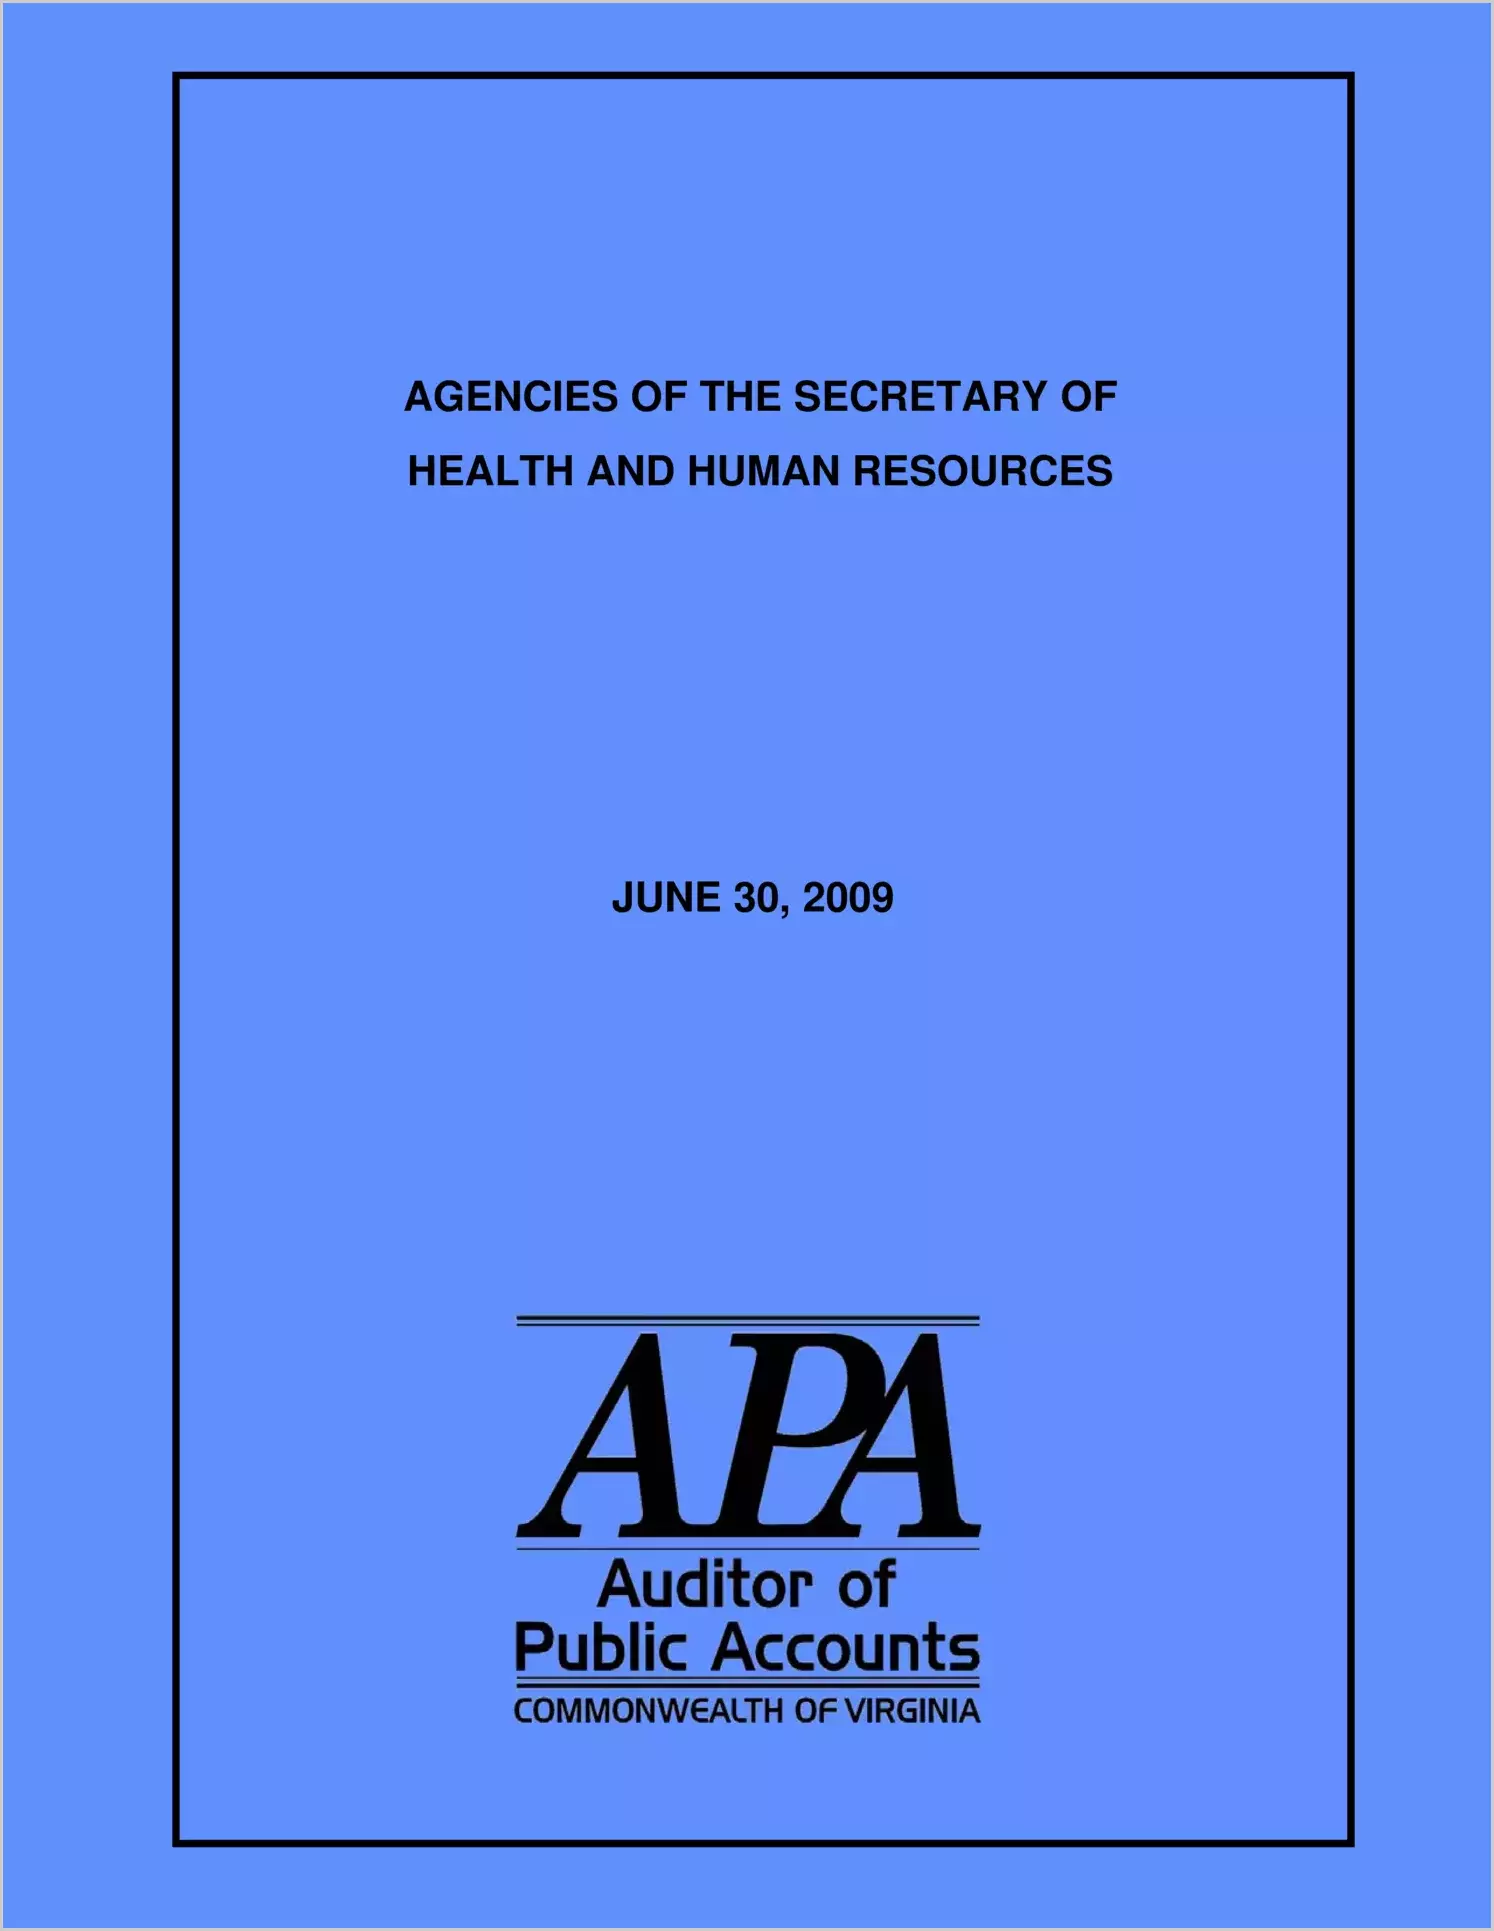 Agencies of the Secretary of Health and Human Resources - June 30, 2009